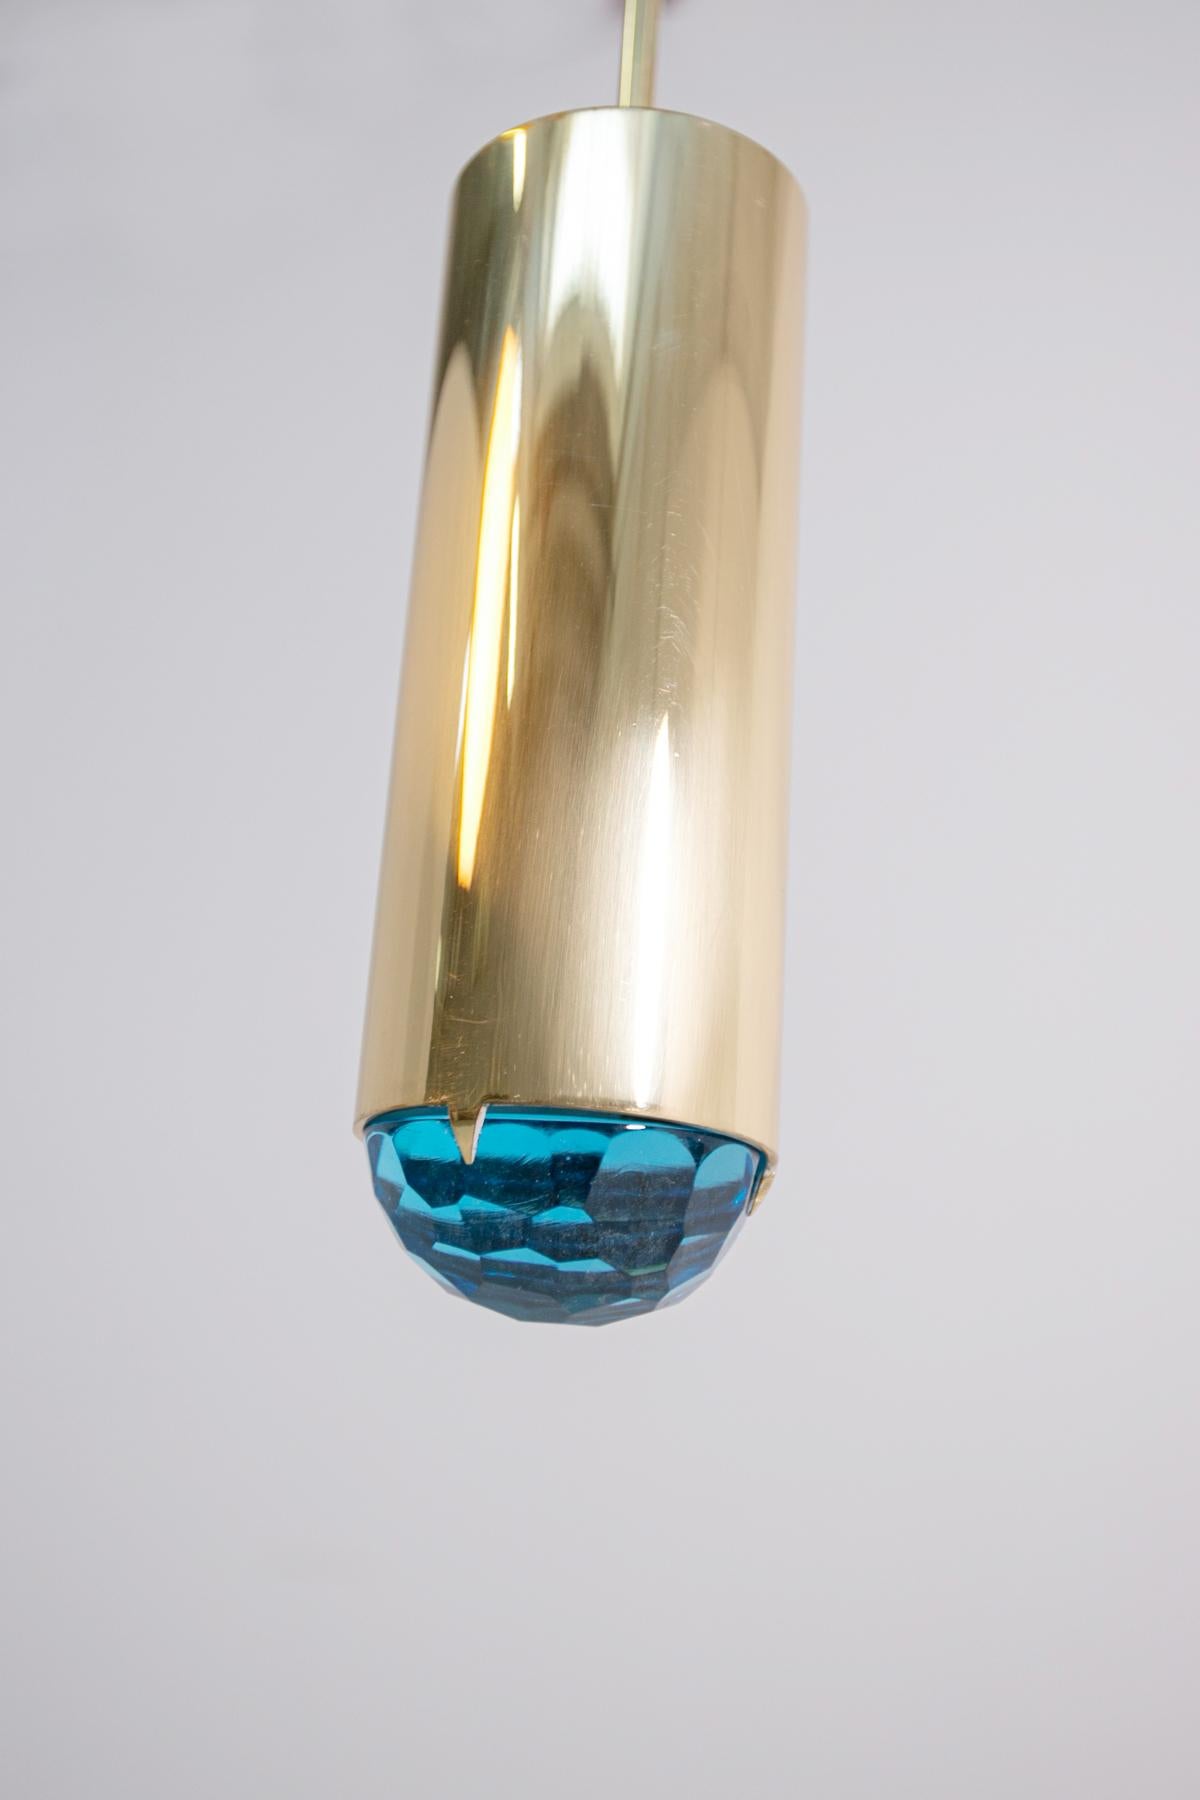 Italian Pendant by Ghirò in Brass and Blue Glass, Signed 2020 For Sale 5